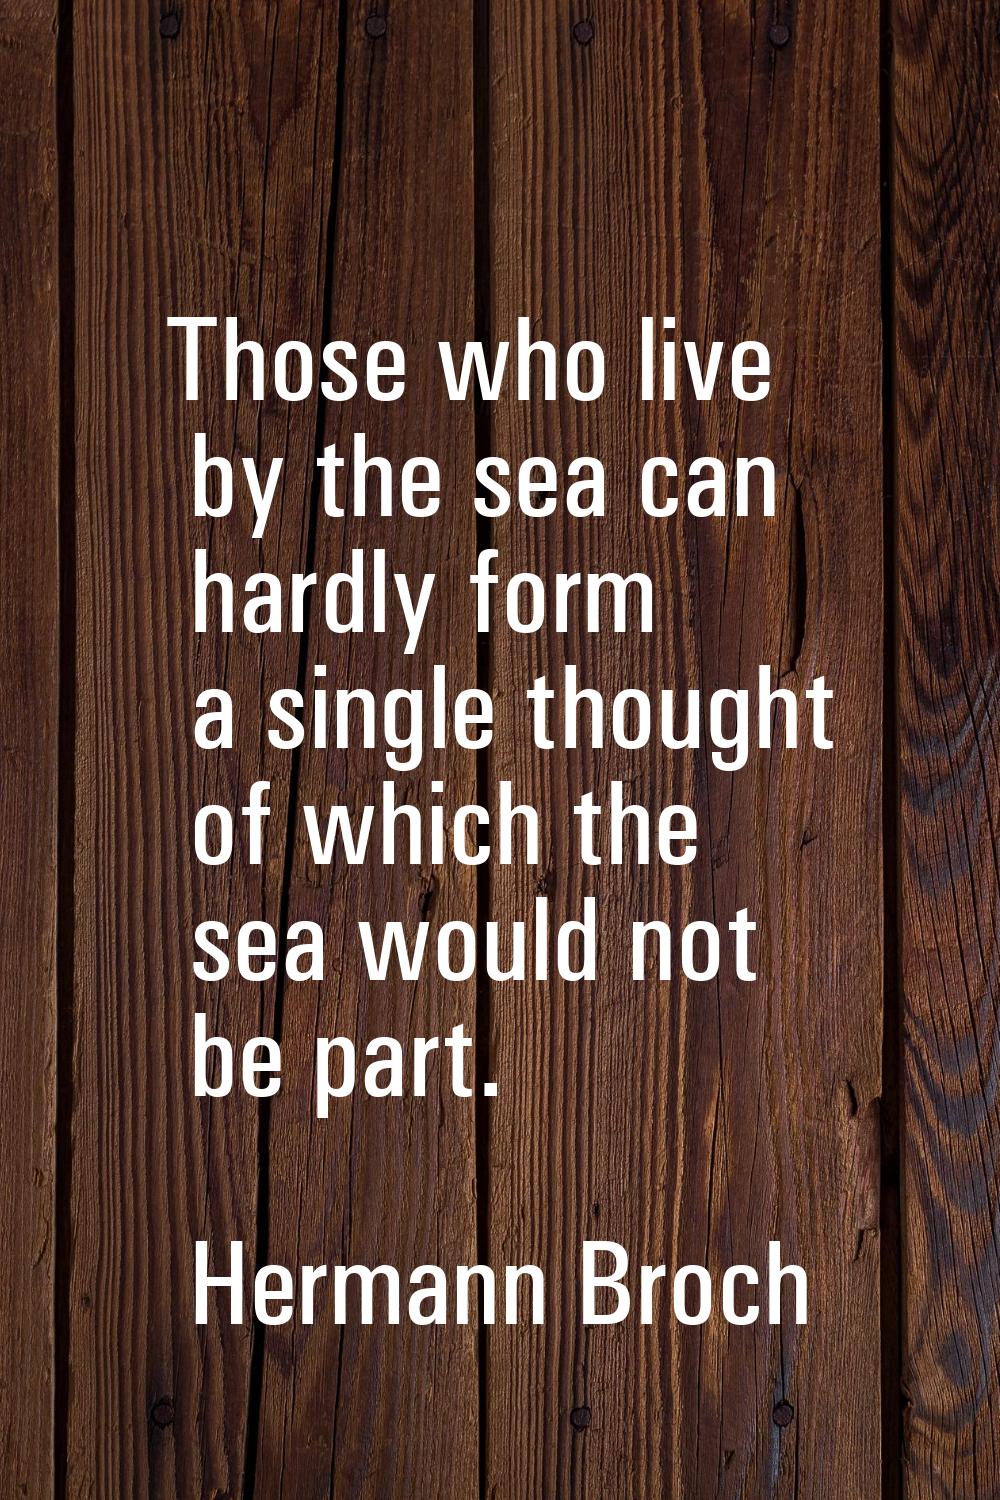 Those who live by the sea can hardly form a single thought of which the sea would not be part.